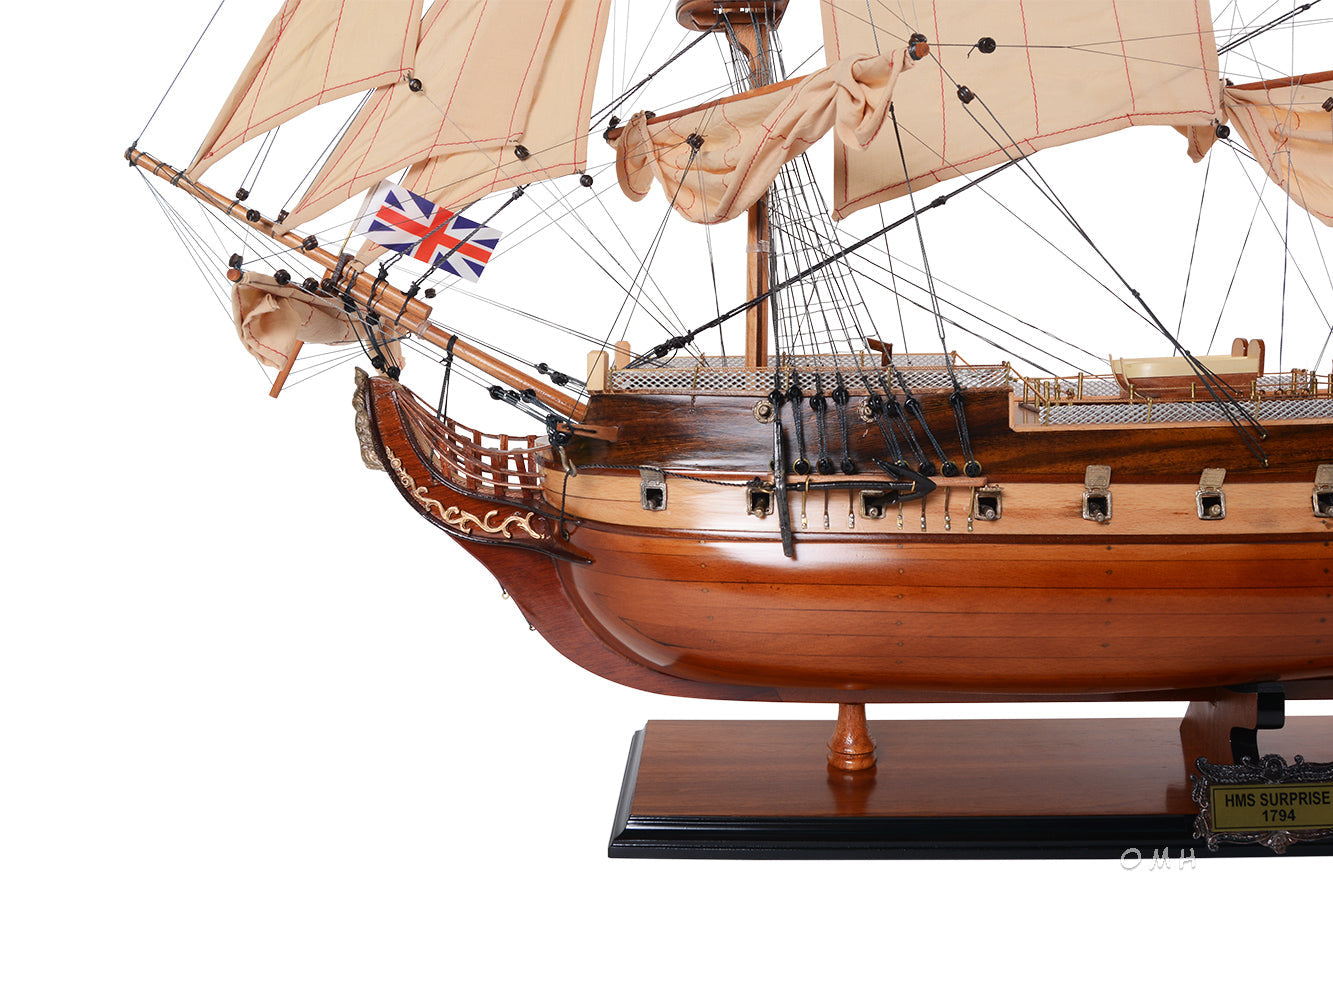 ALDO Hobbies & Creative Arts> Collectibles> Scale Model L: 37 W: 12 H: 31 Inches / new / wood HMS Surprise British Royal Navy Frigate Tall Ship  Portrayed in the Movie Master and Commander Wood Model Sailboat Assembled